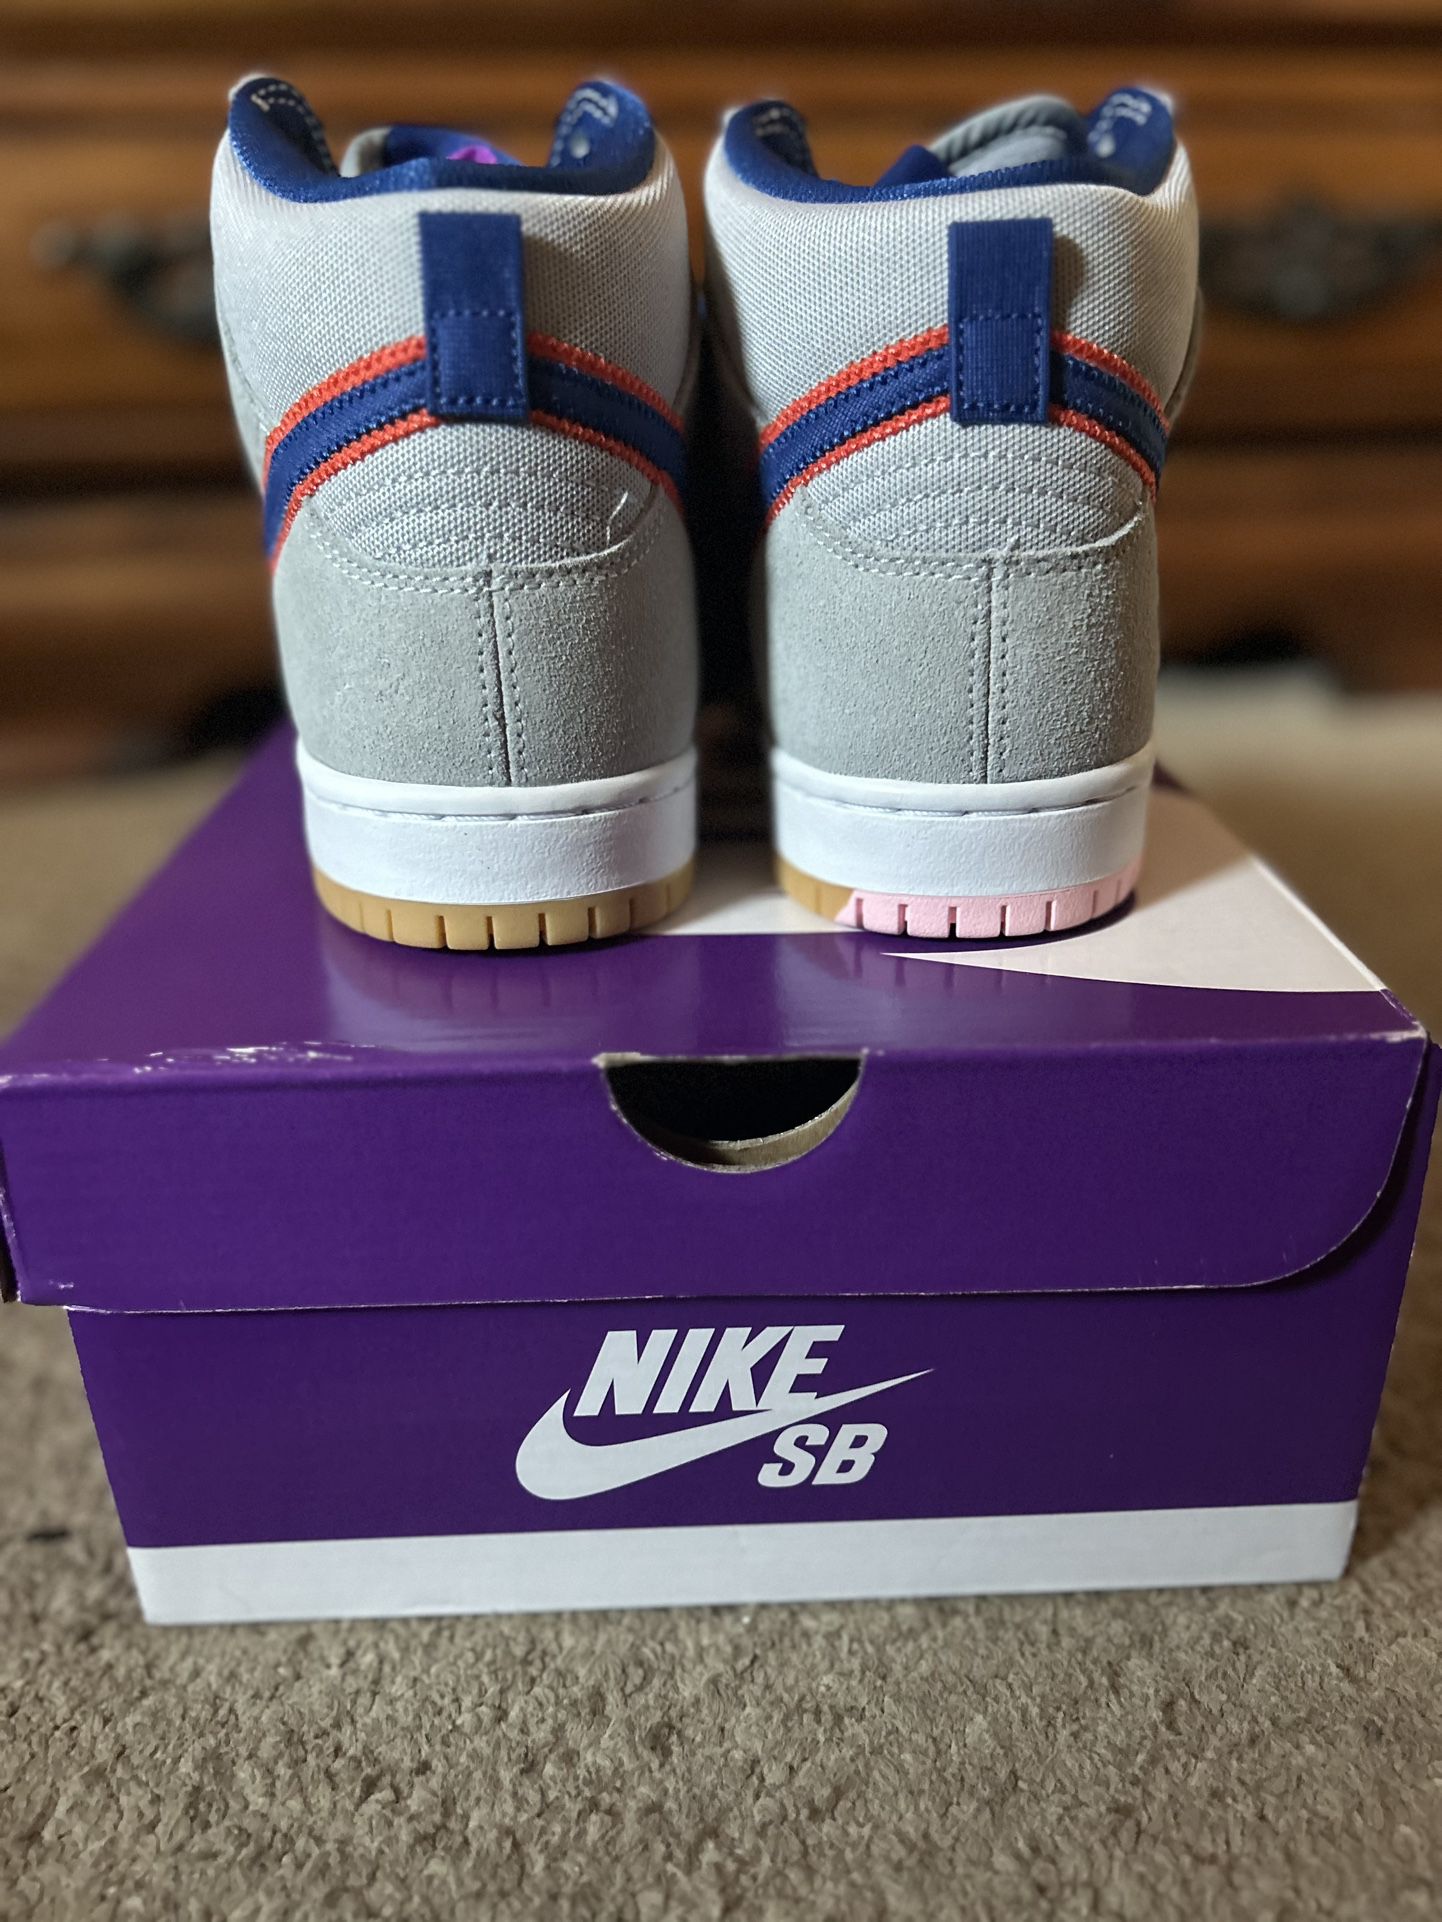 SNY on X: These Mets themed Nike SB Dunk Highs 🔥 (via